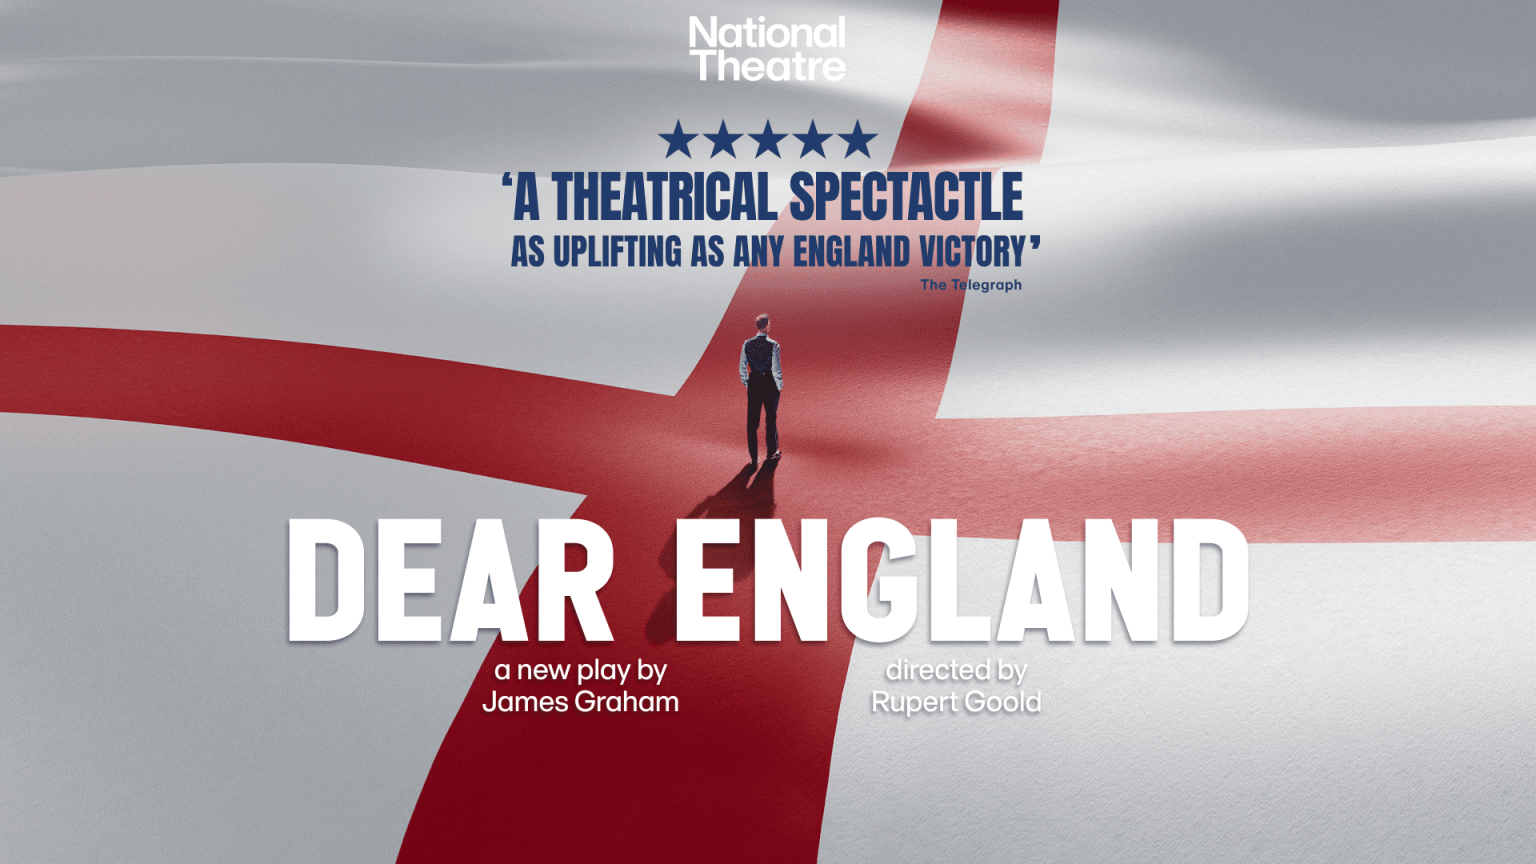 Dear England official artwork. A man stands in the centre of the image, on top of a huge English flag which covers the whole image. The show information is printed on the image.